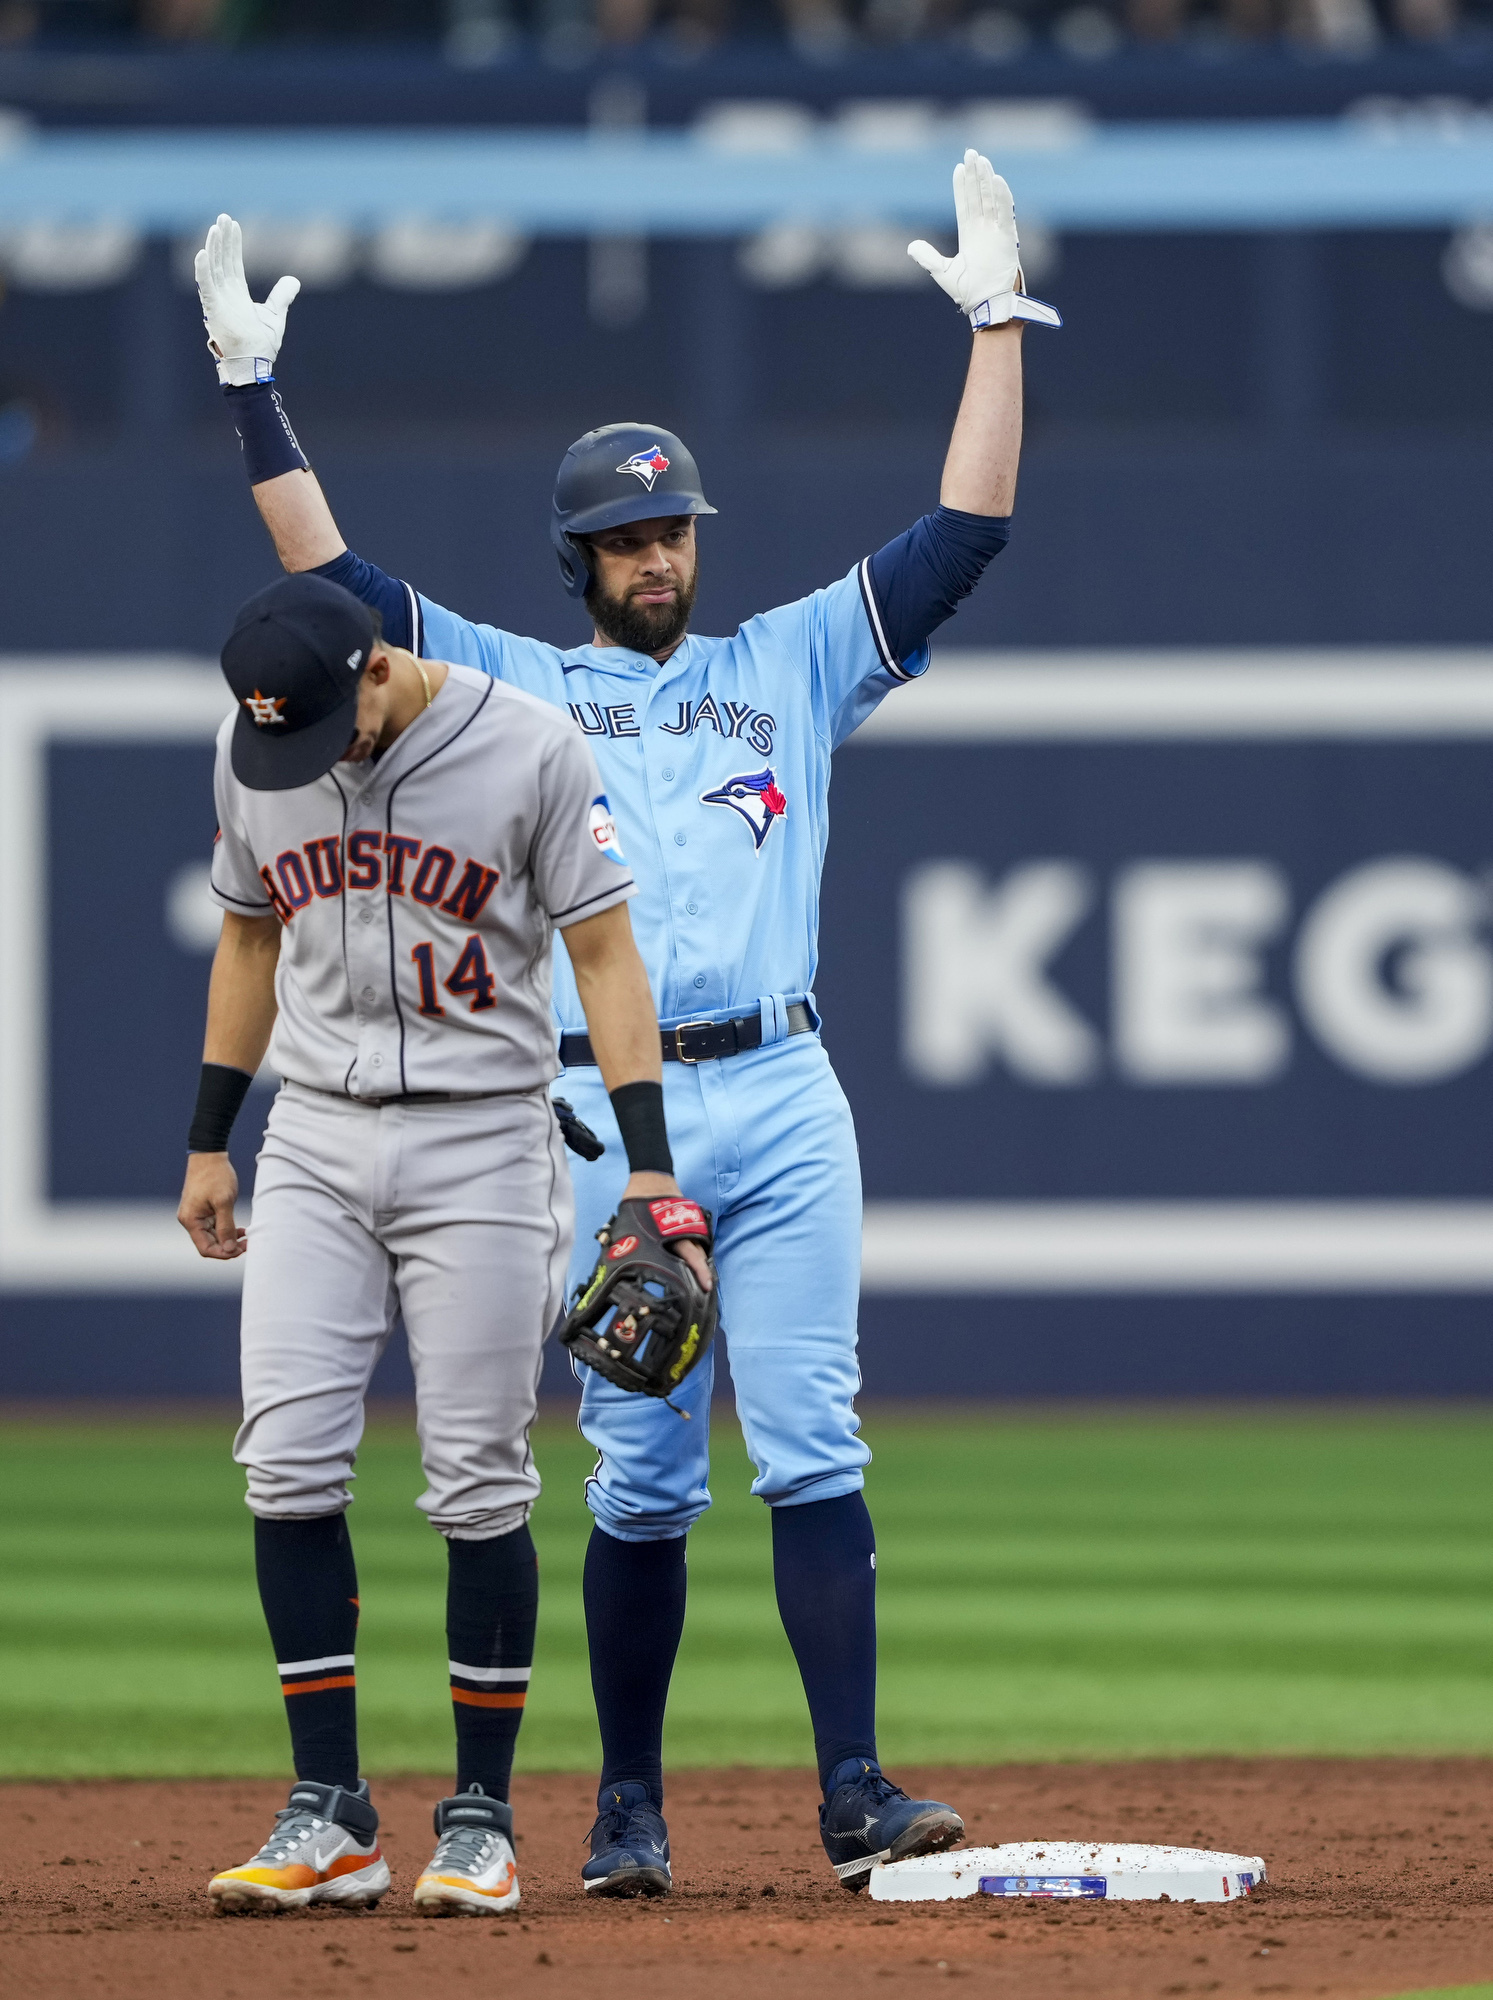 Garcia dominant, Peña homers as Astros cruise past Blue Jays to